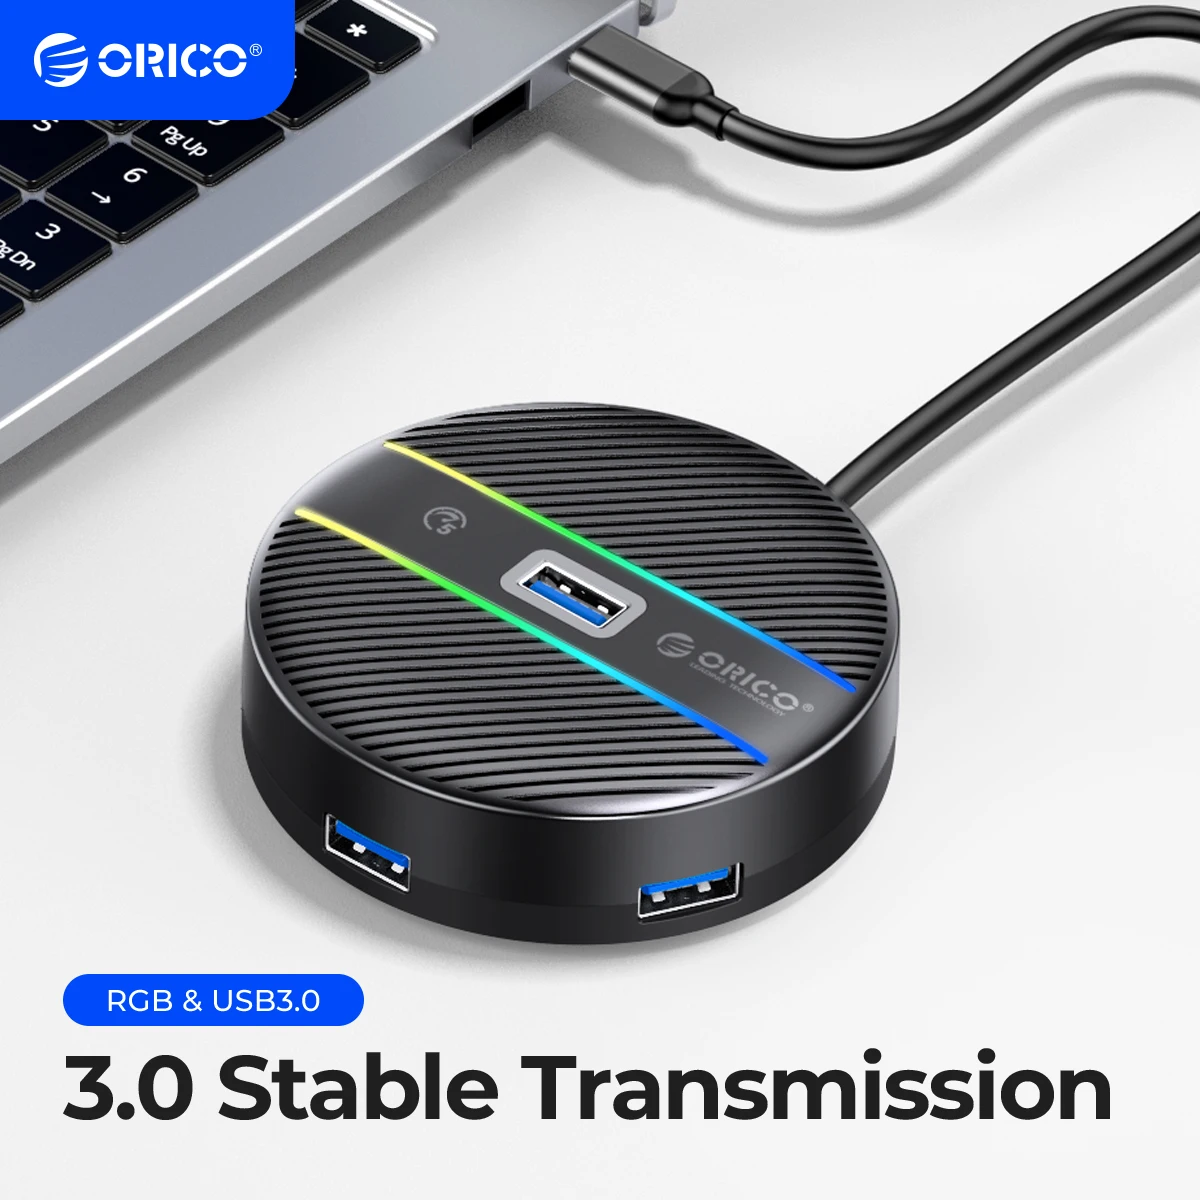 

ORICO 4 Ports USB 3.0 HUB Round USB C Splitter with Type C Charge Power SD TF Ports for hard drives PC Macbook Pro